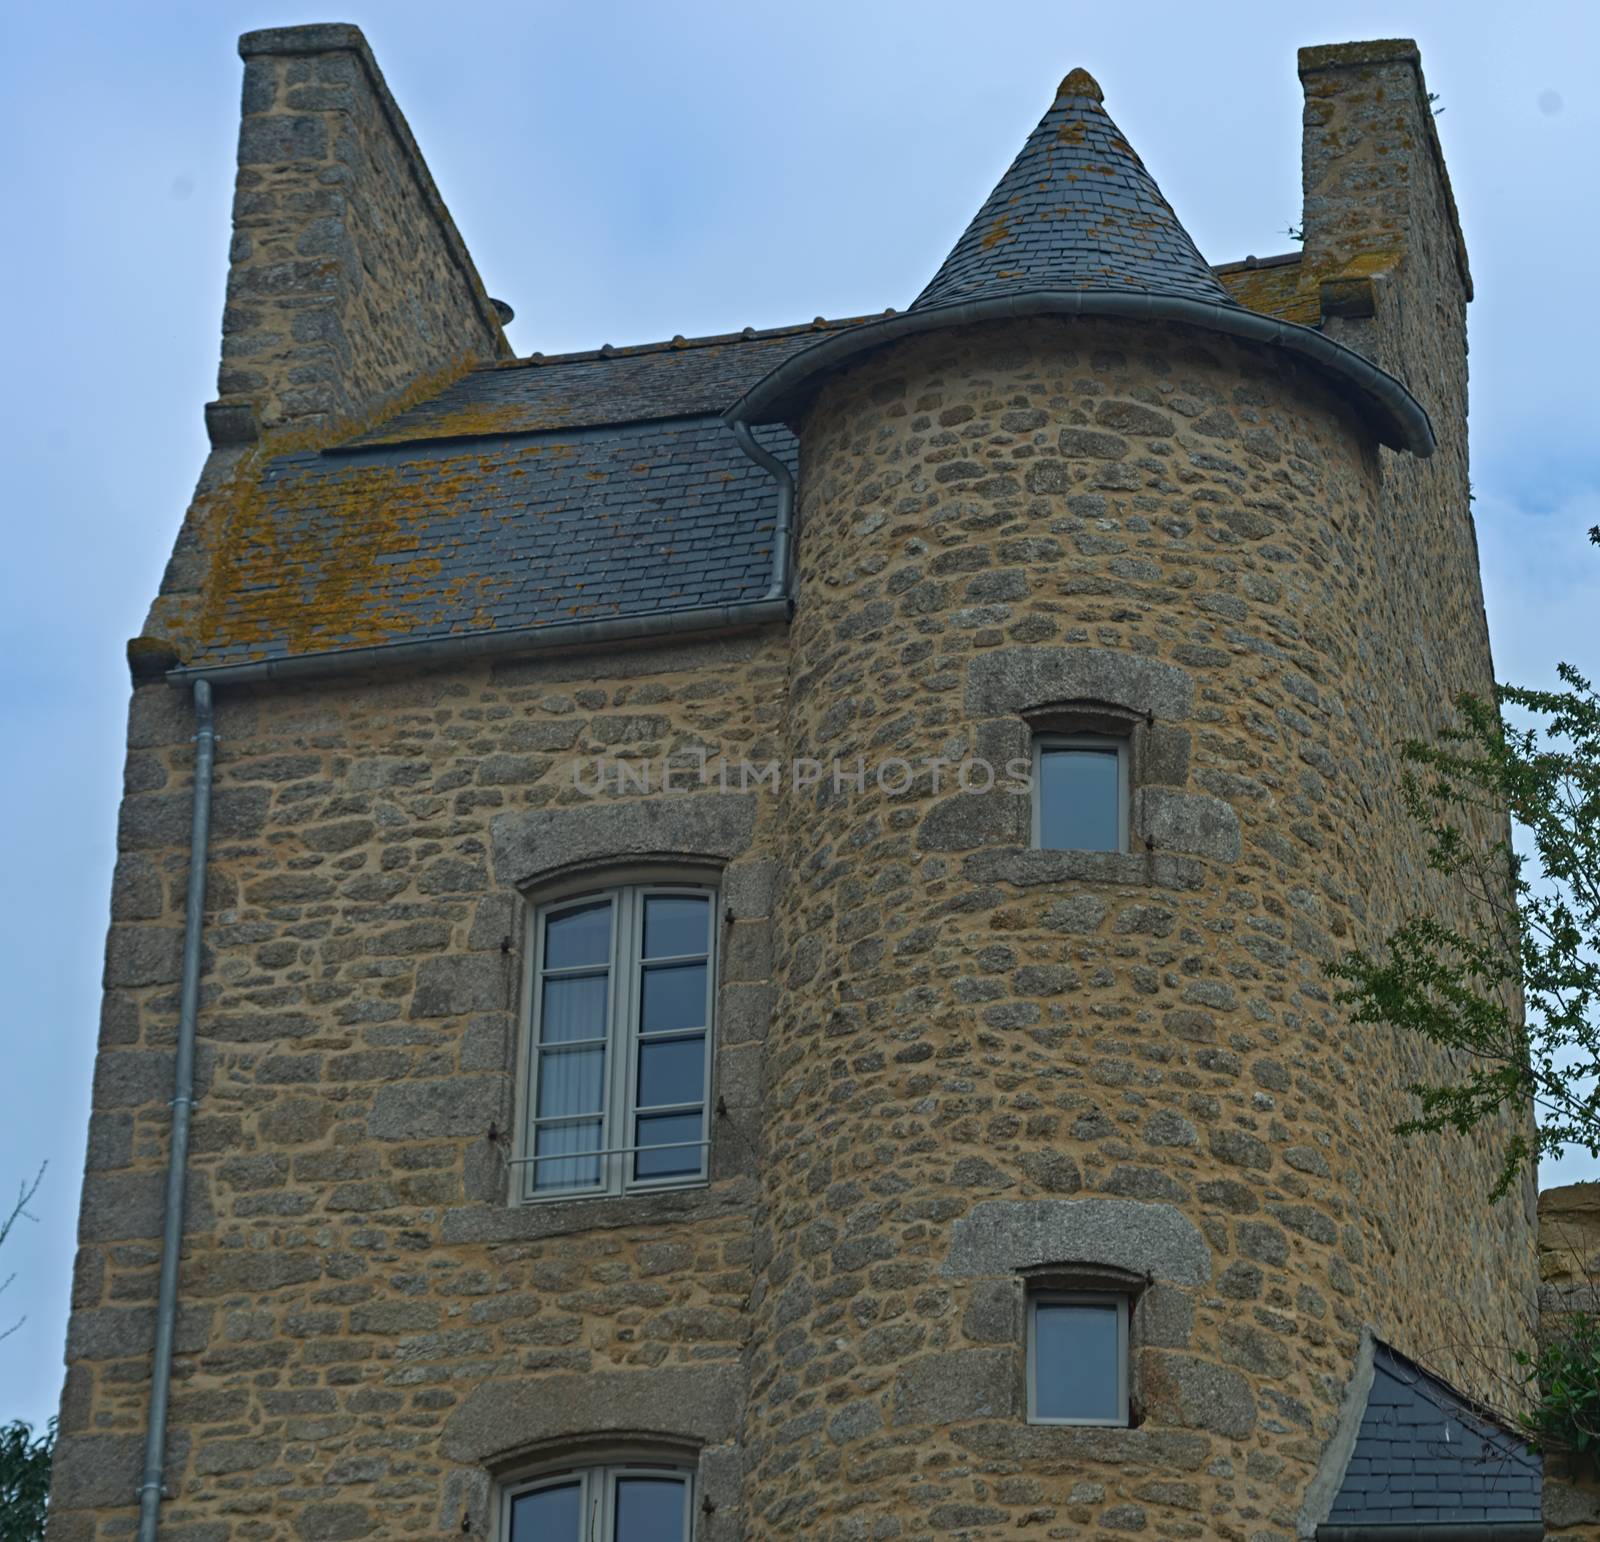 Old traditional urban stone house in Dinan, France